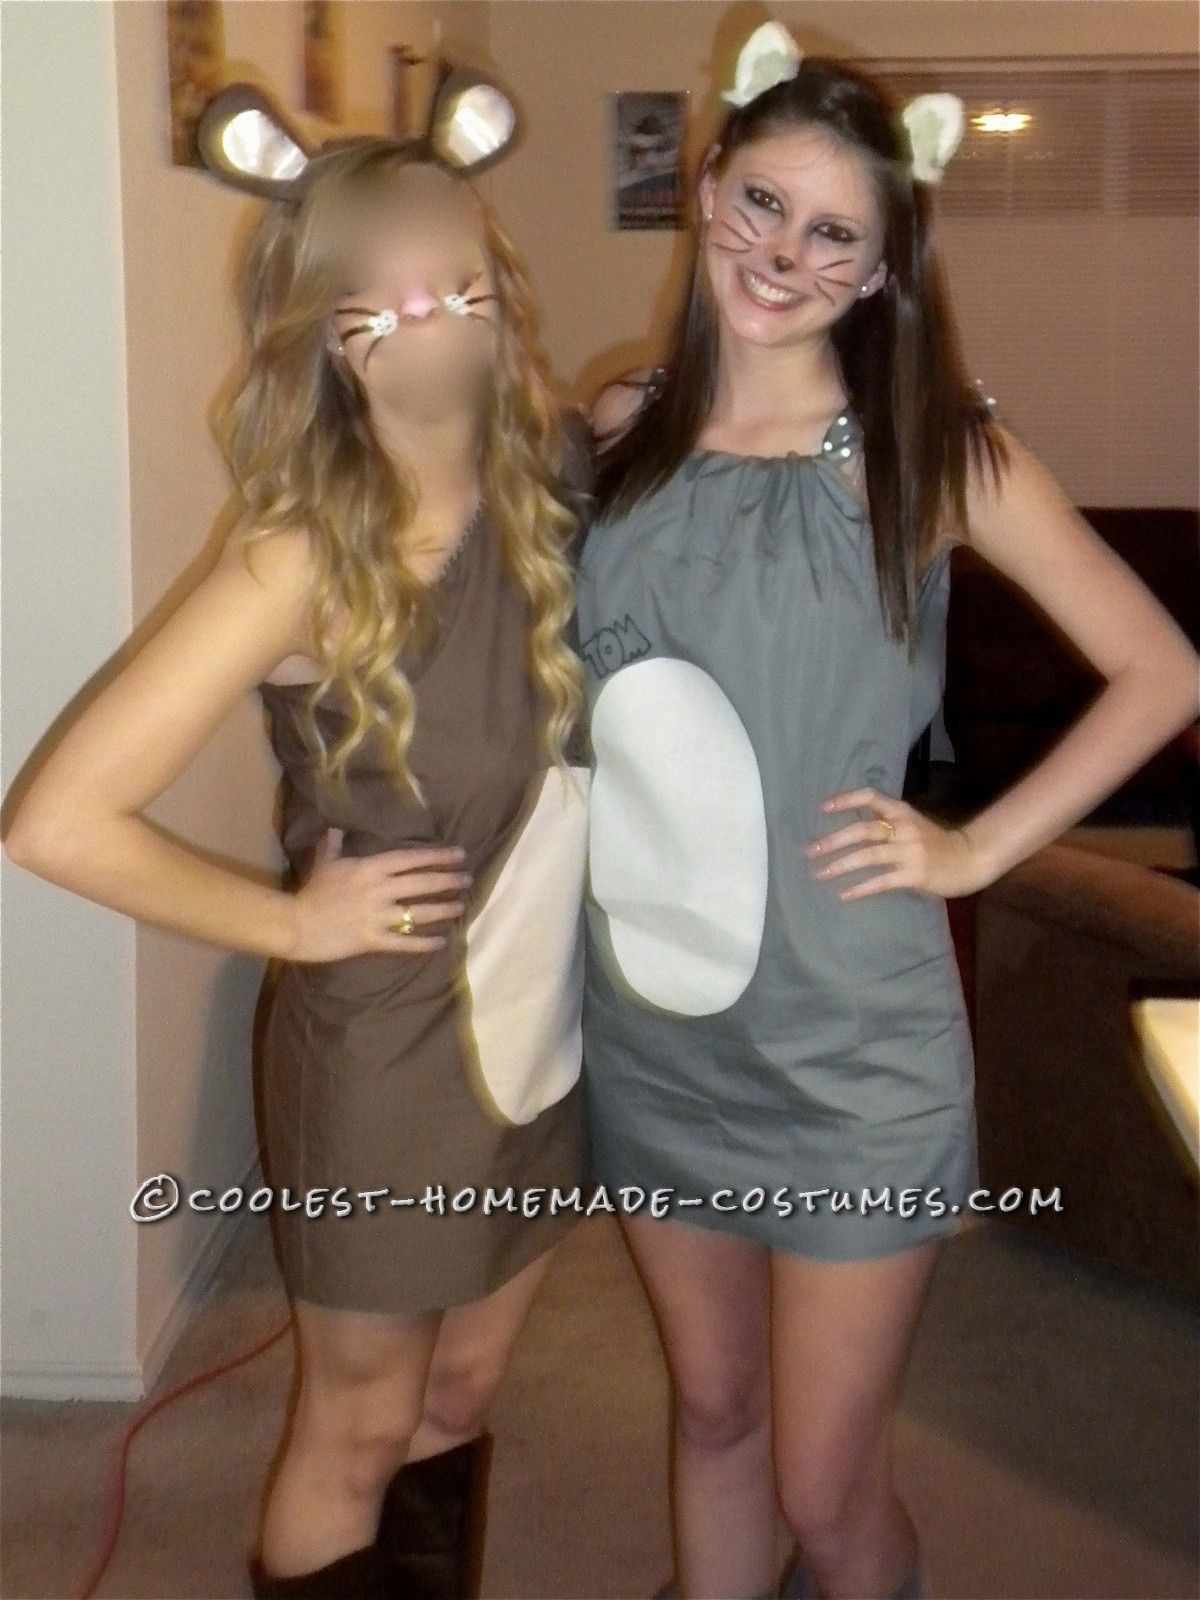 Tom And Jerry Costumes DIY
 Cute Homemade Tom and Jerry Couple Halloween Costume